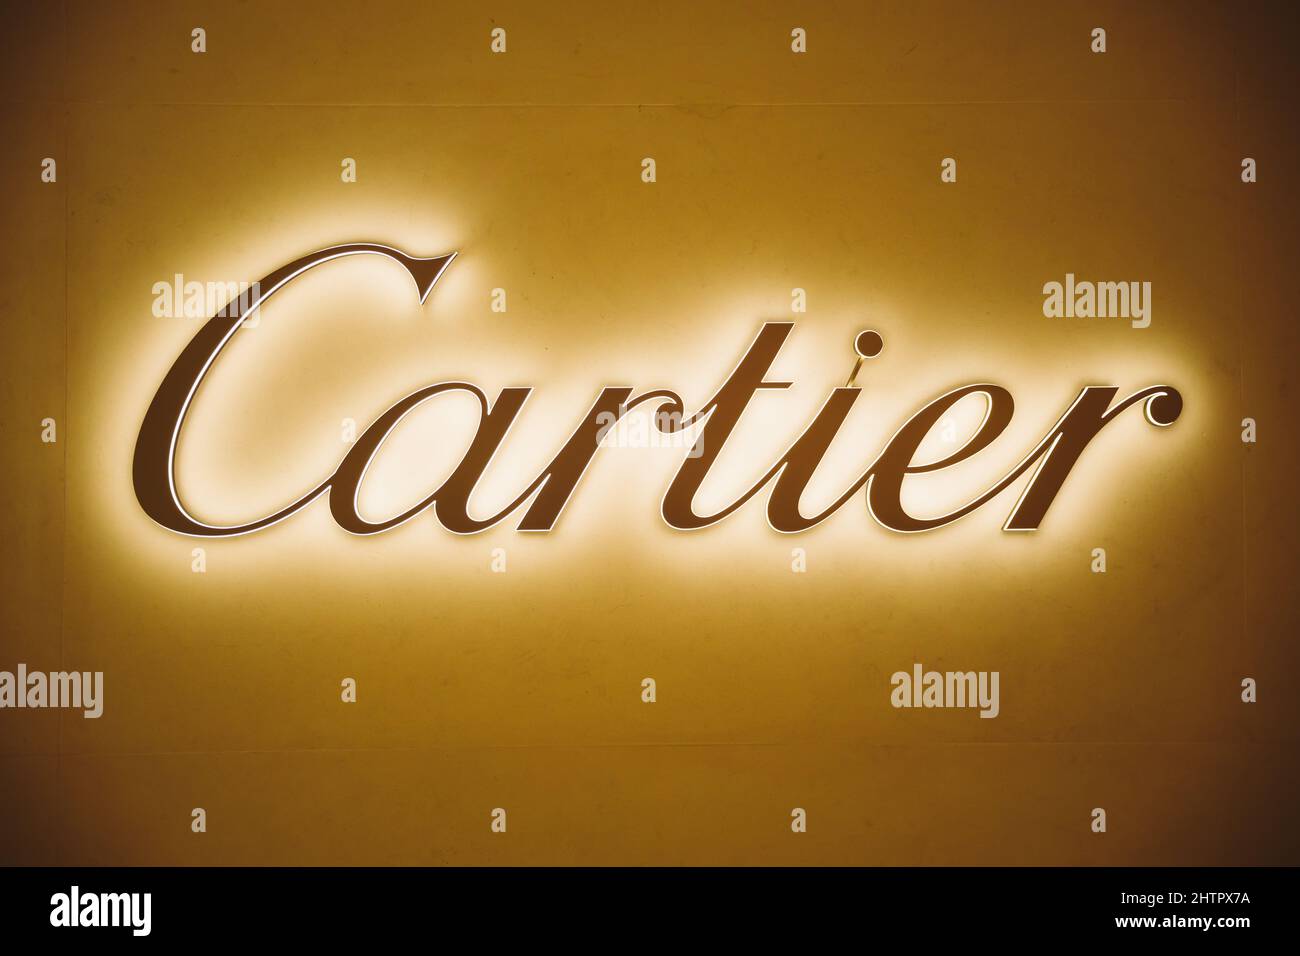 Dubai, UAE, United Arab Emirates - May 28, 2021: Close golden logotype Cartier (jeweler) Brand at wall of store in shopping center. Cartier Stock Photo